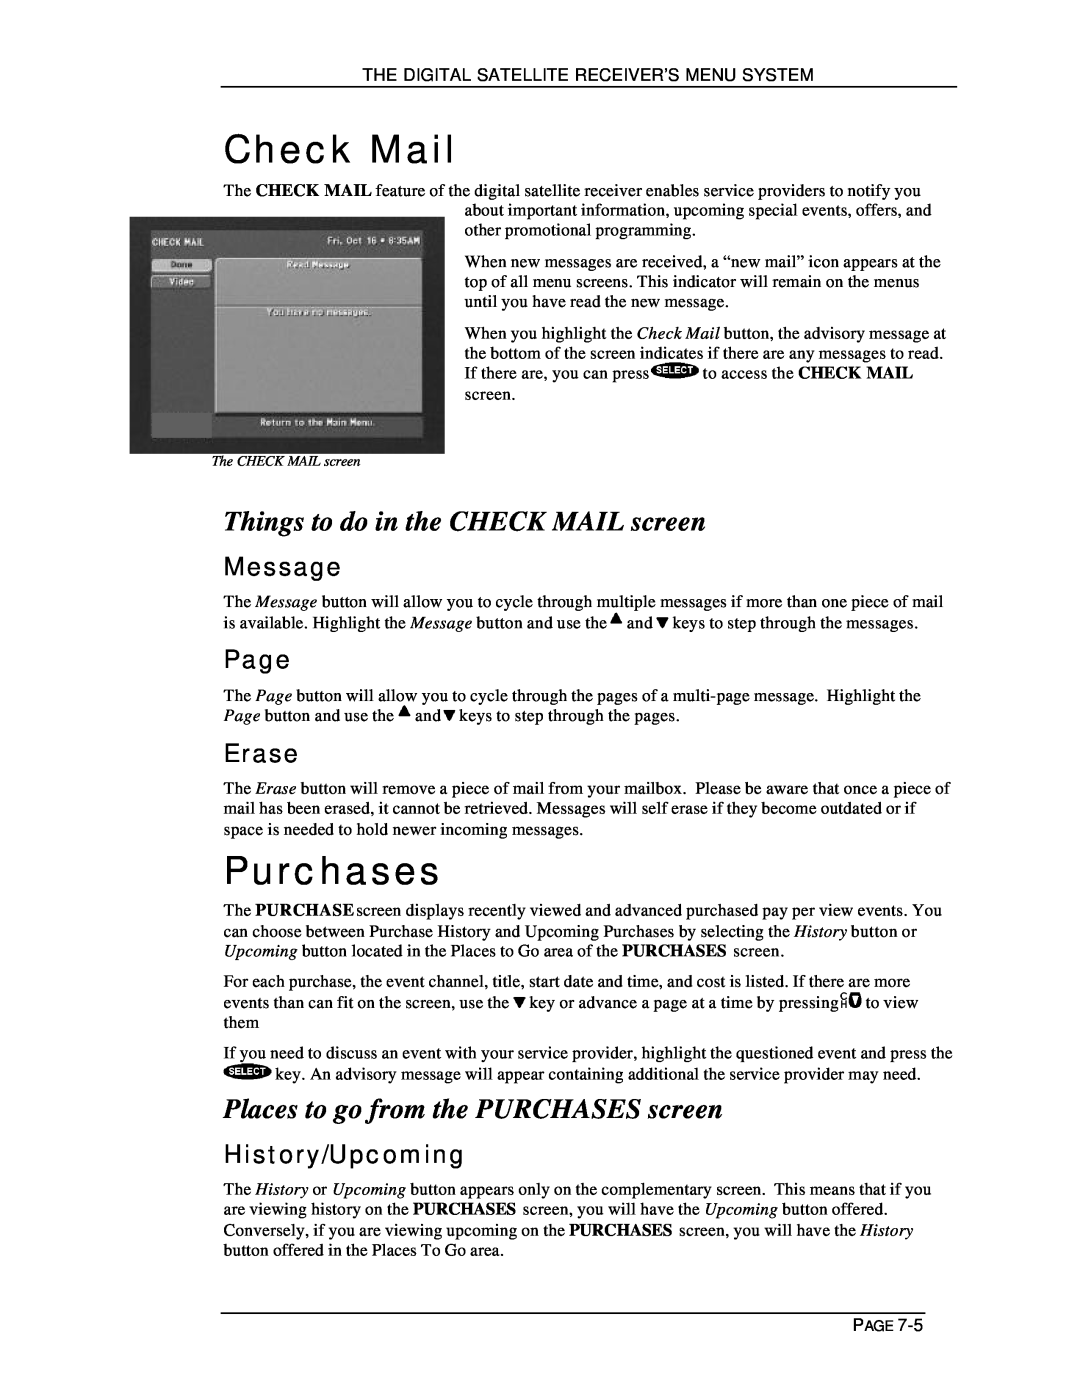 DirecTV HIRD-D11 Check Mail, Purchases, Things to do in the CHECK MAIL screen, Places to go from the PURCHASES screen 